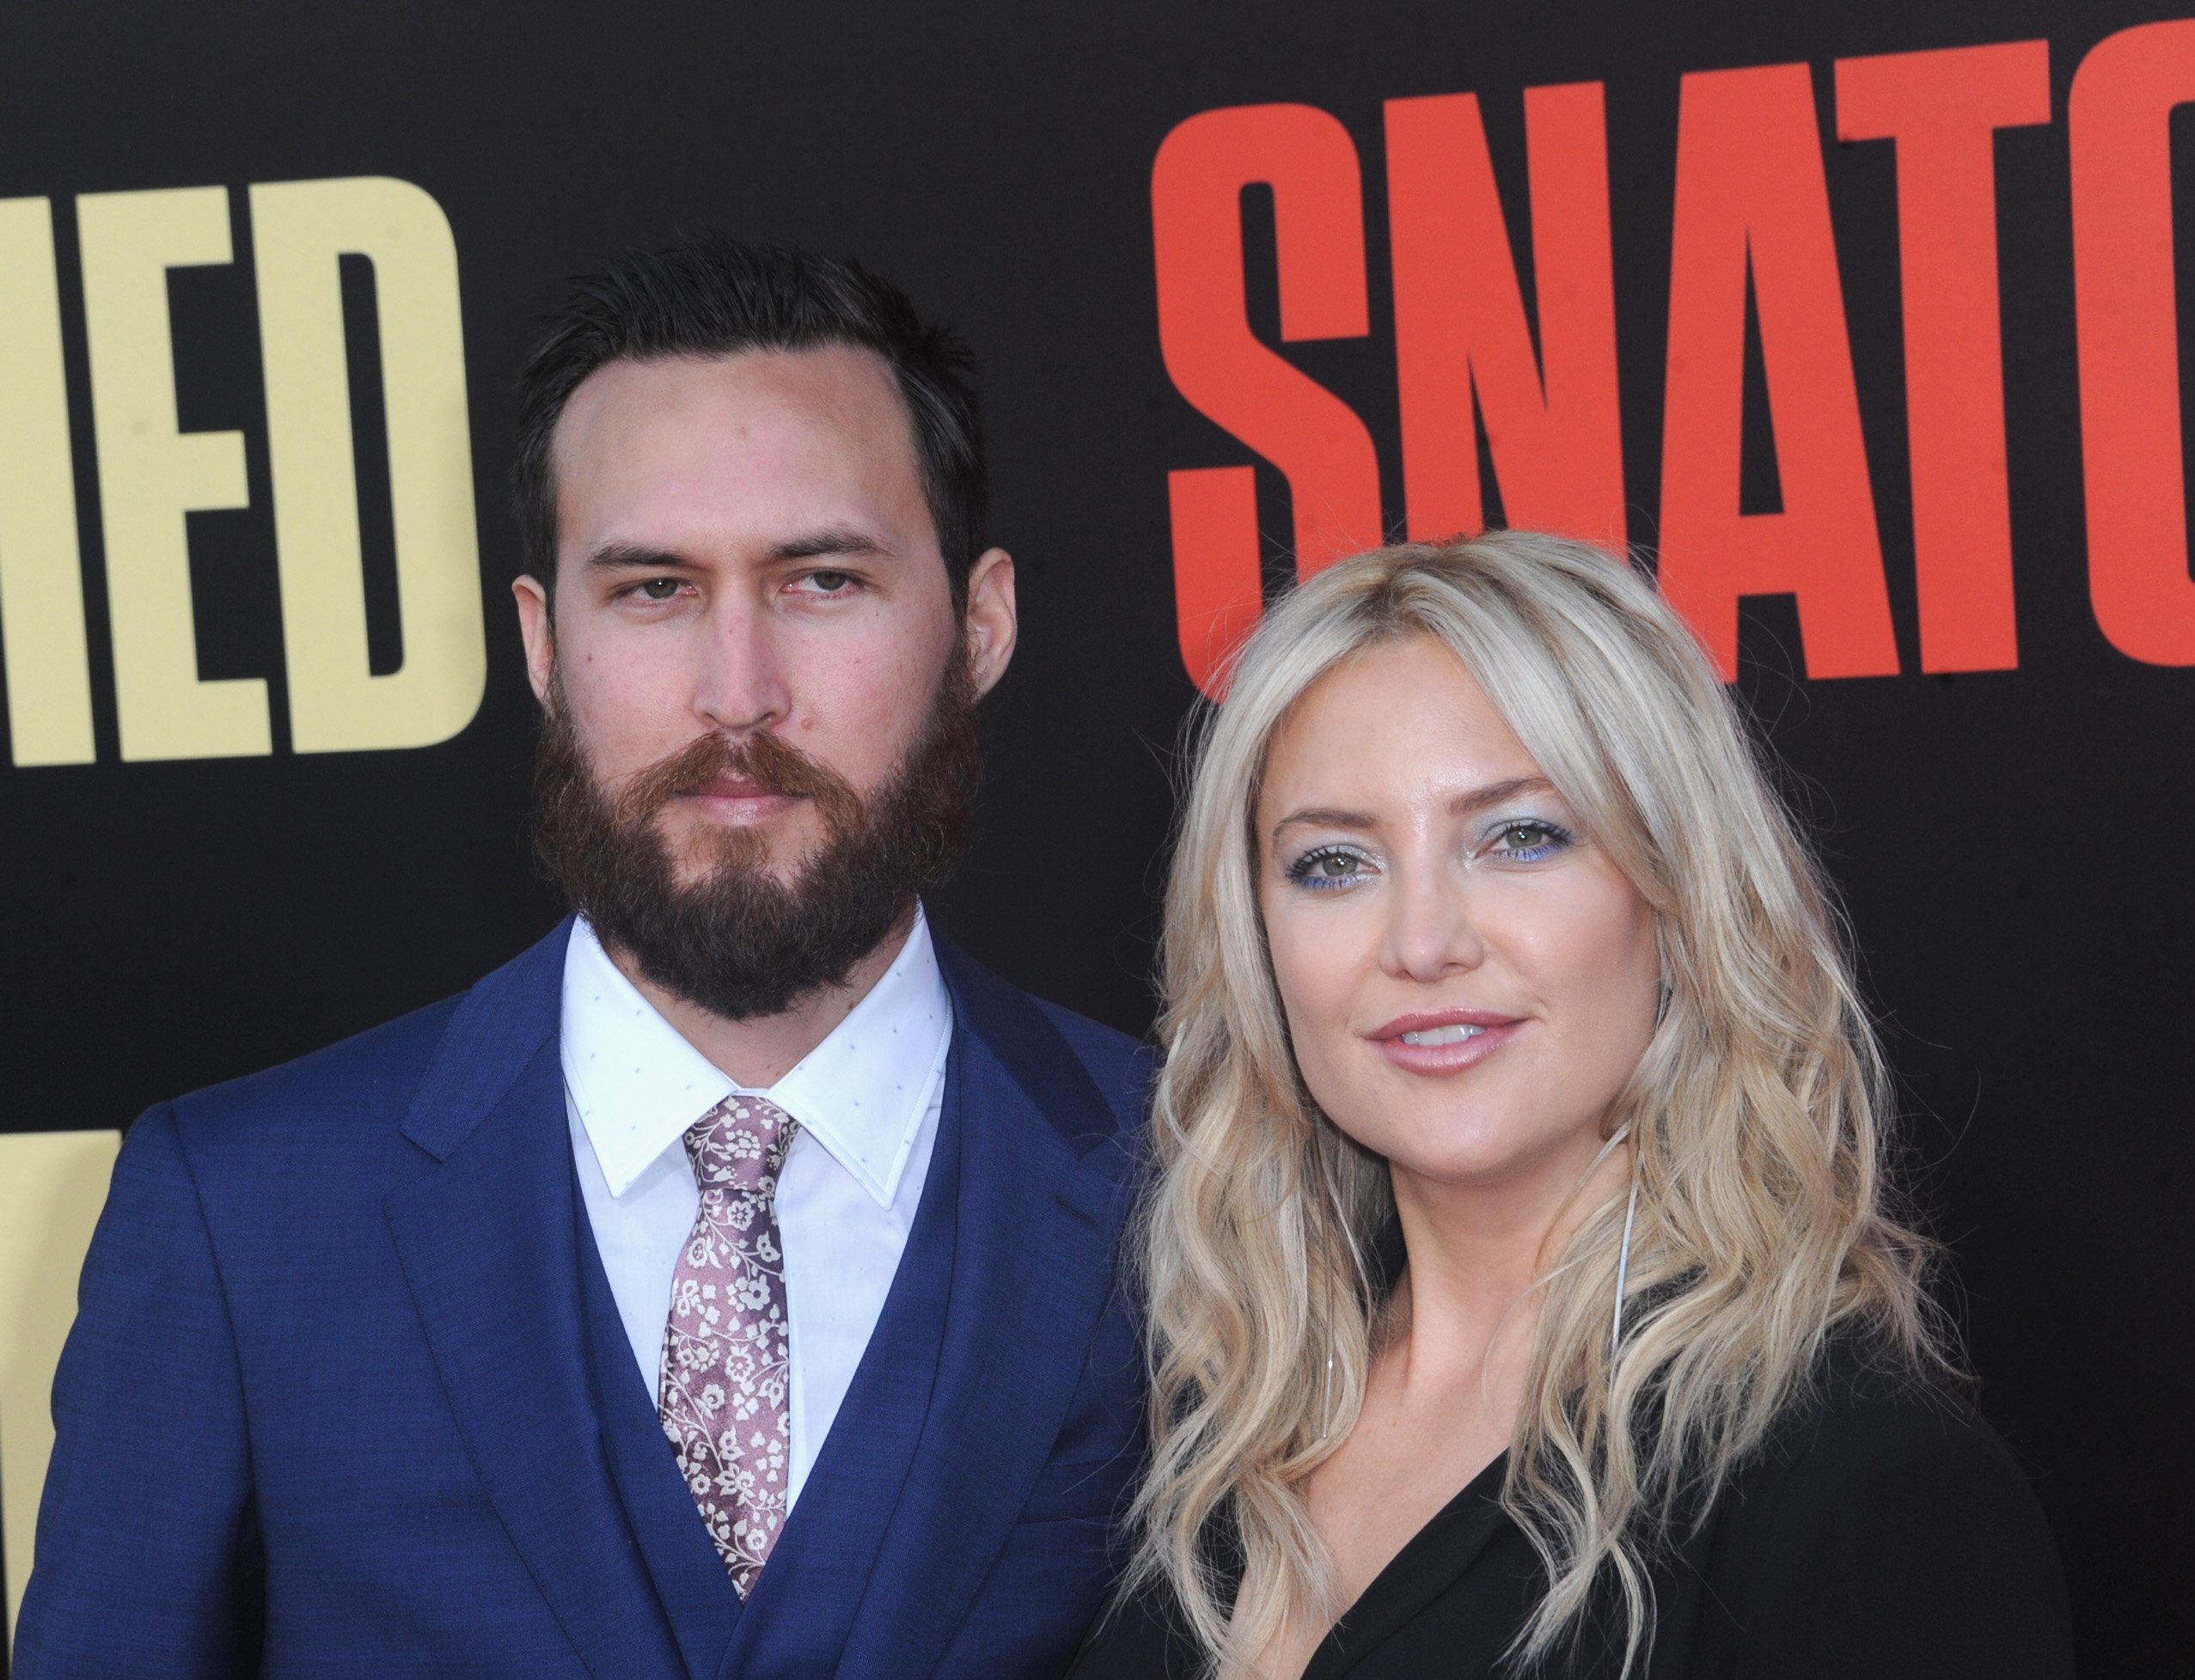 Danny Fujikawa and Kate Hudson arrive for the premiere of "Snatched" on May 10, 2017, in Westwood, California. | Source: Getty Images.